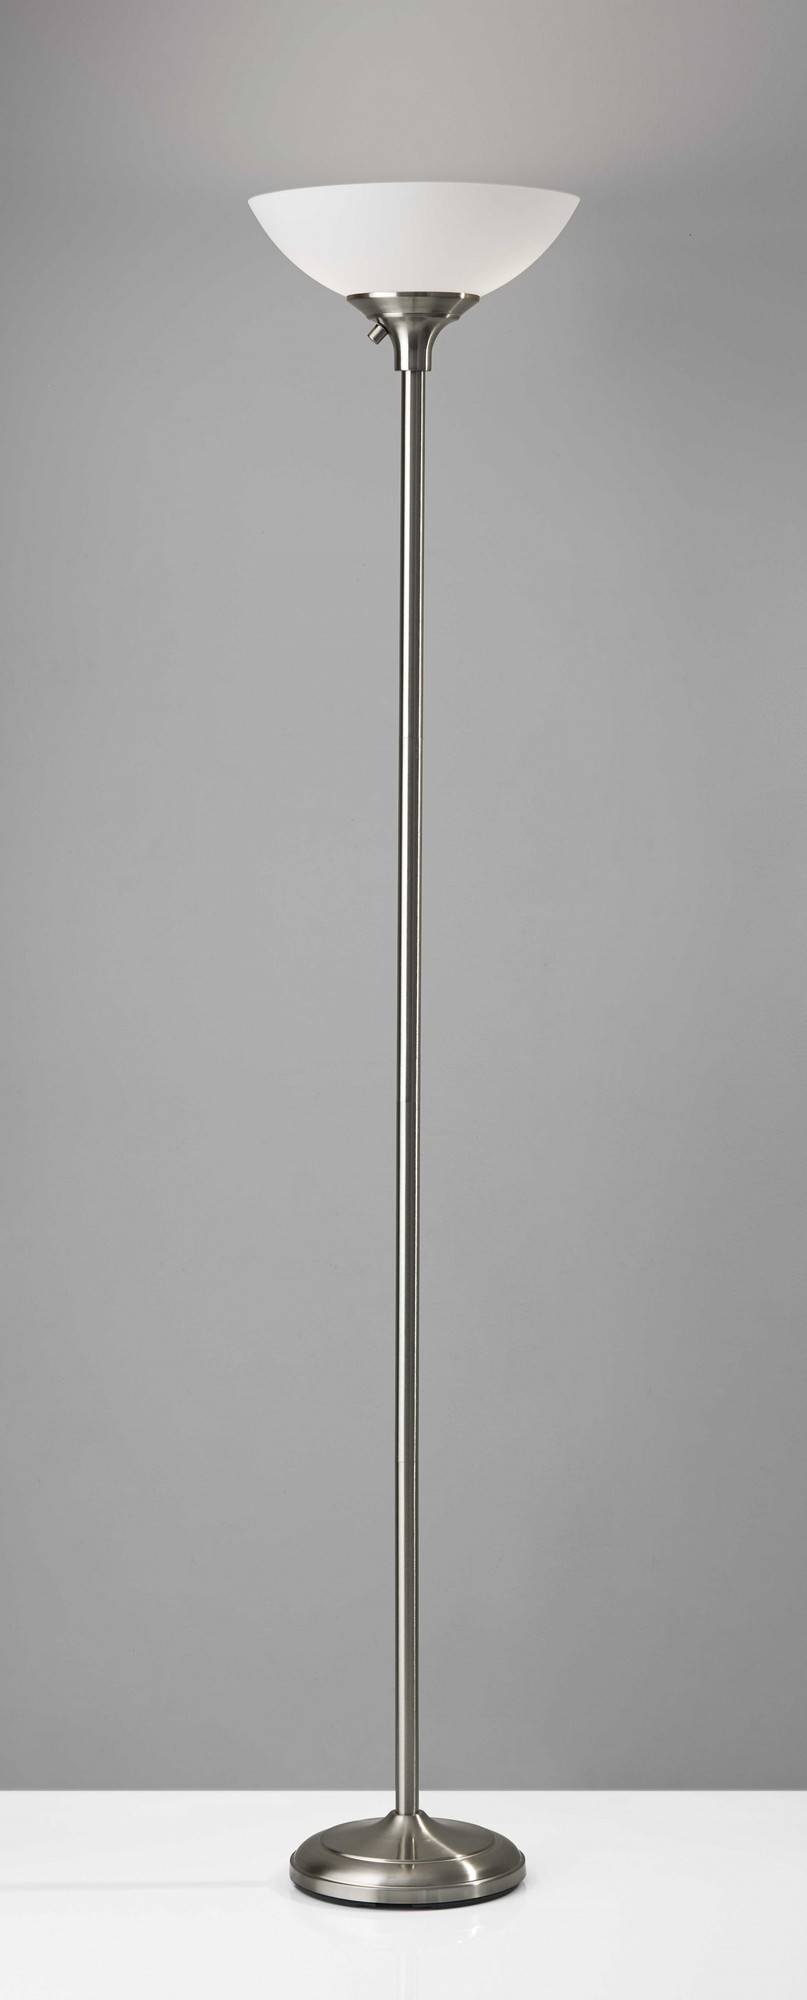 13.75" X 13.75" X 71" Brushed steel Metal 300W Torchiere